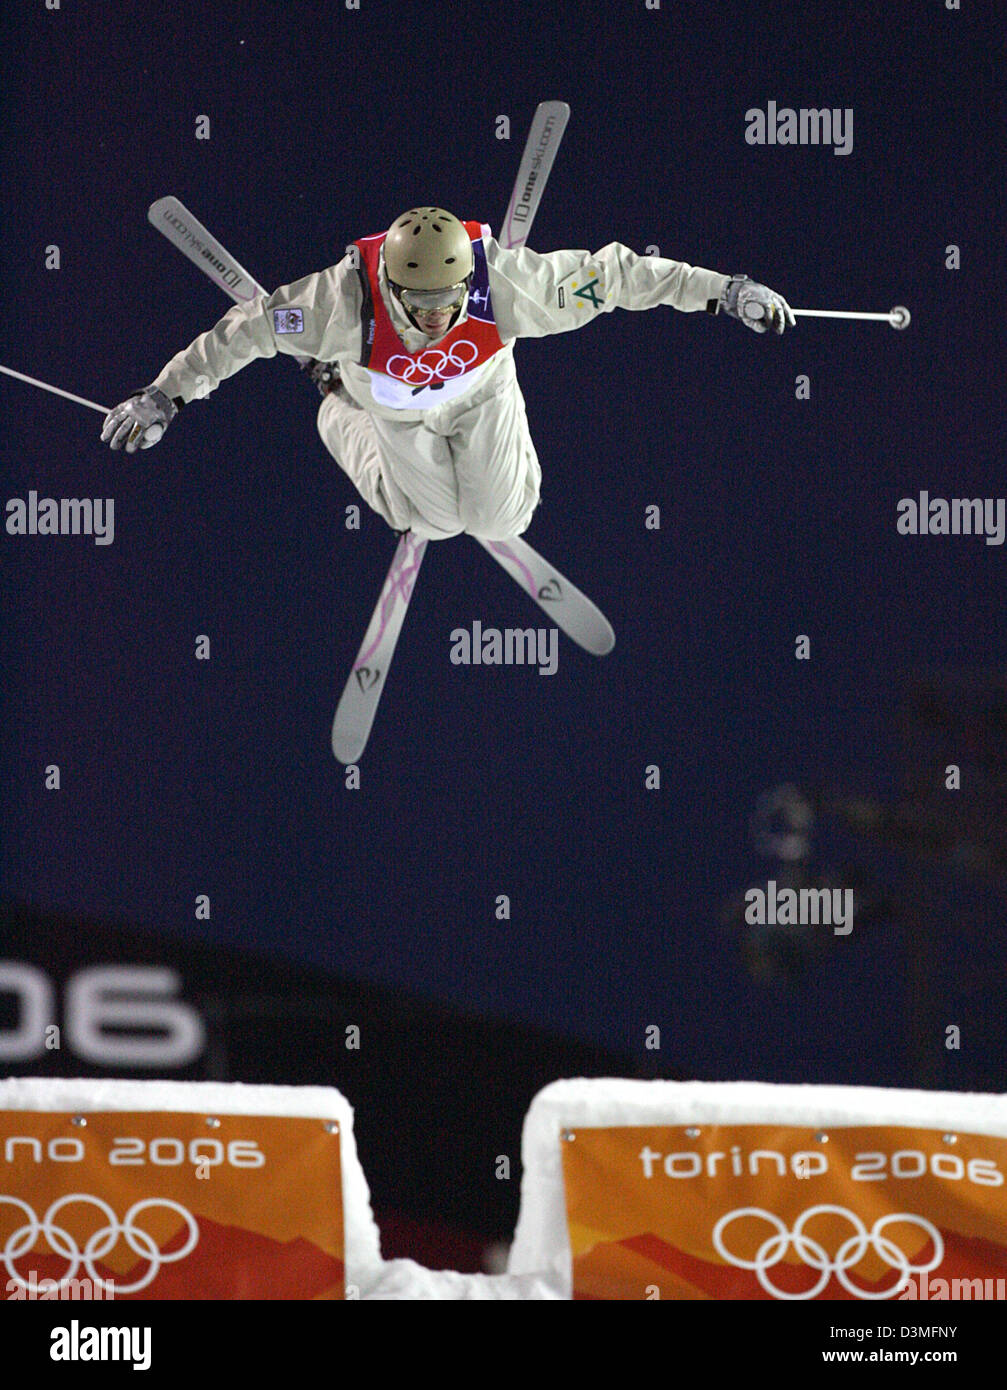 Australian Freestyler Dale Begg-Smith jumps on the mogul slope at the Olympic Men's mogul competition in Sauze d'Oulx, Italy, 15 February 2006. Dawson won the gold medal in the Men's Mogul competition at the XX Olympic Winter Games in Turin. Photo: Martin Schutt Stock Photo